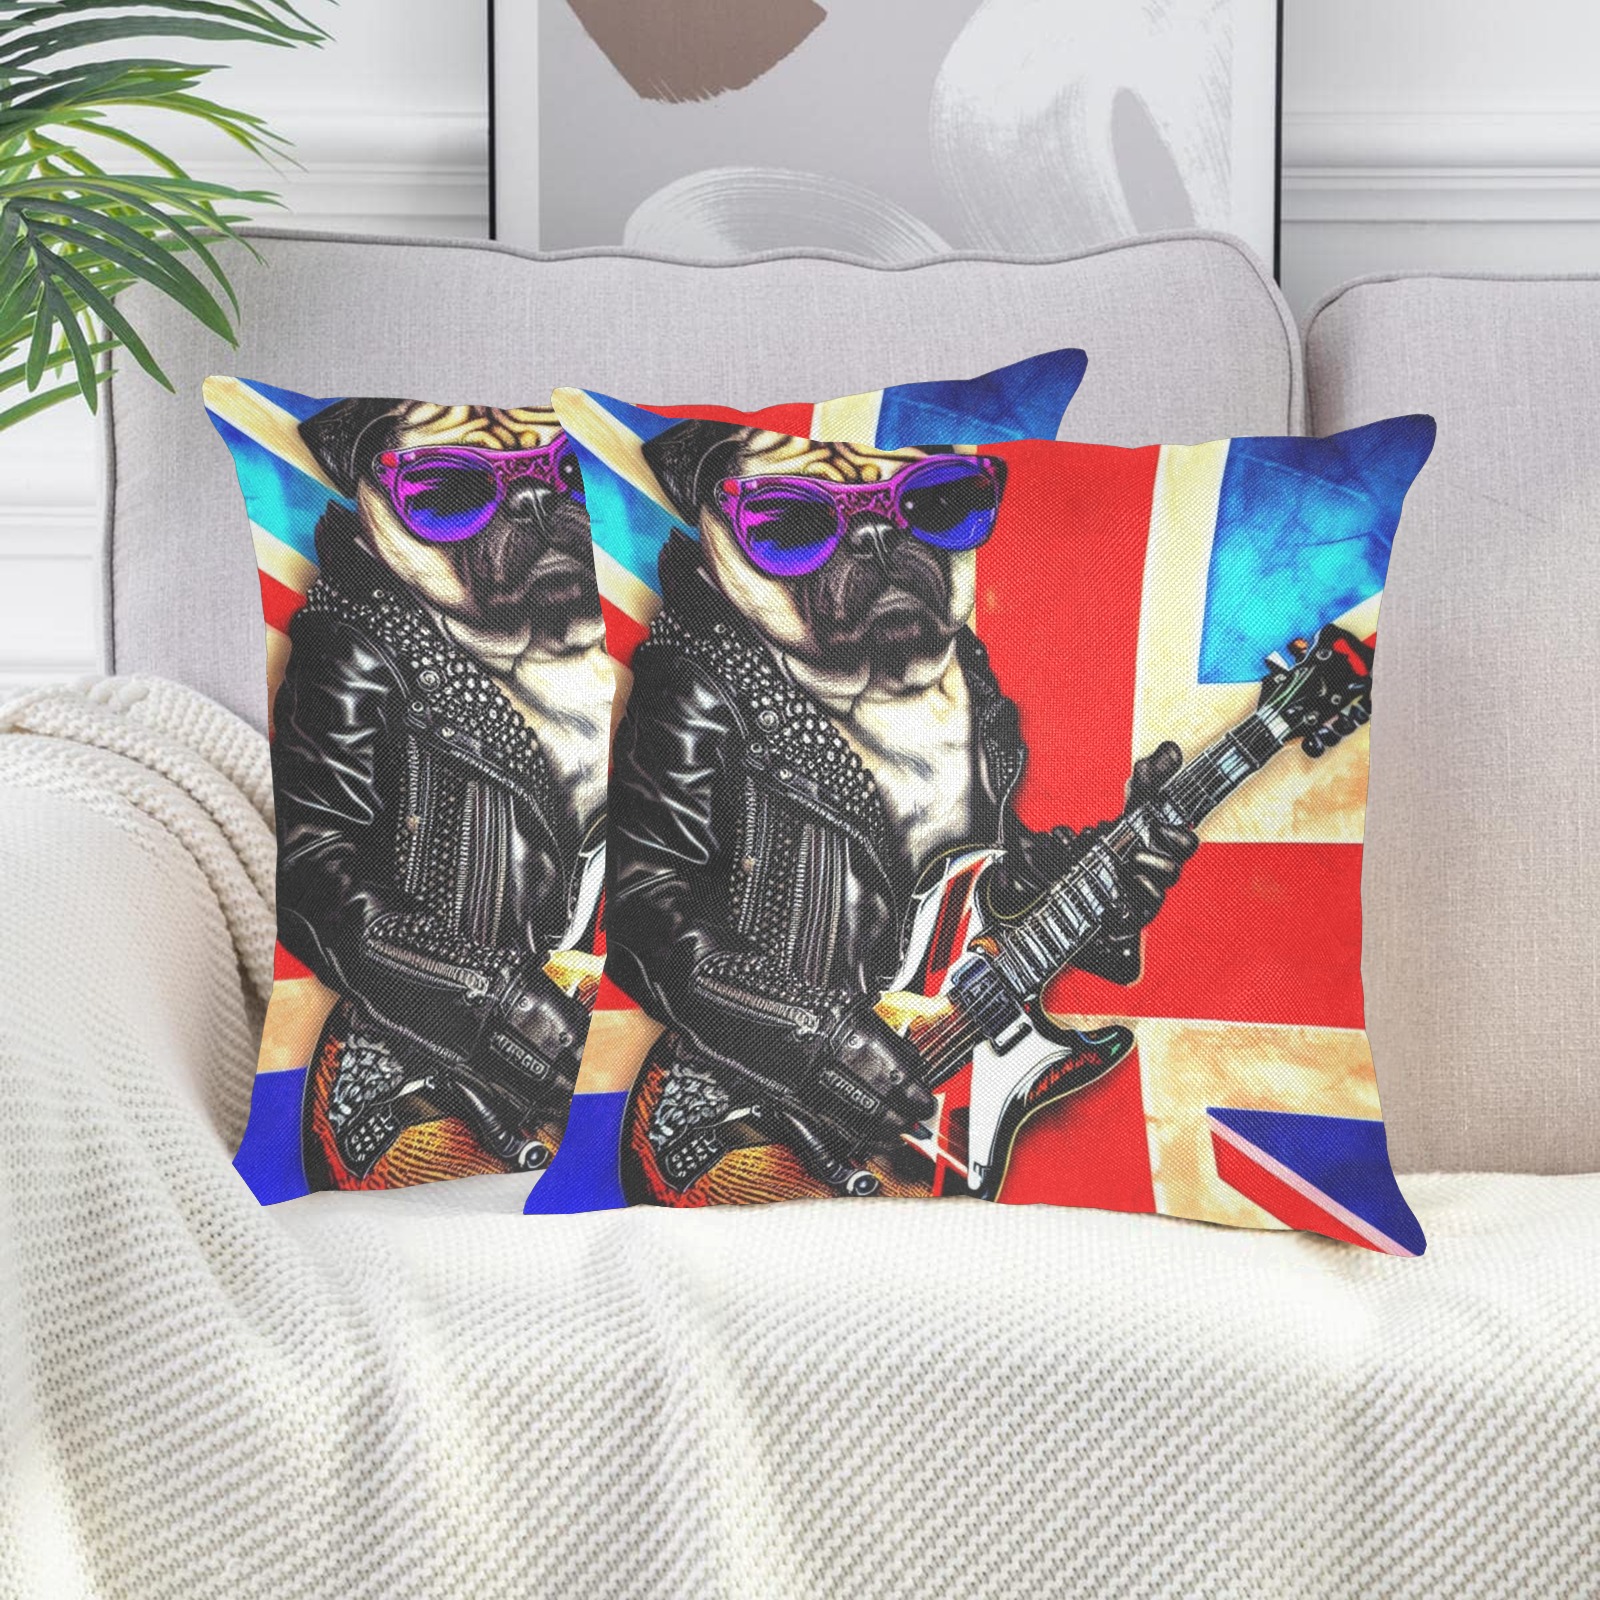 HEAVY ROCK PUG 2 Linen Zippered Pillowcase 18"x18"(Two Sides&Pack of 2)